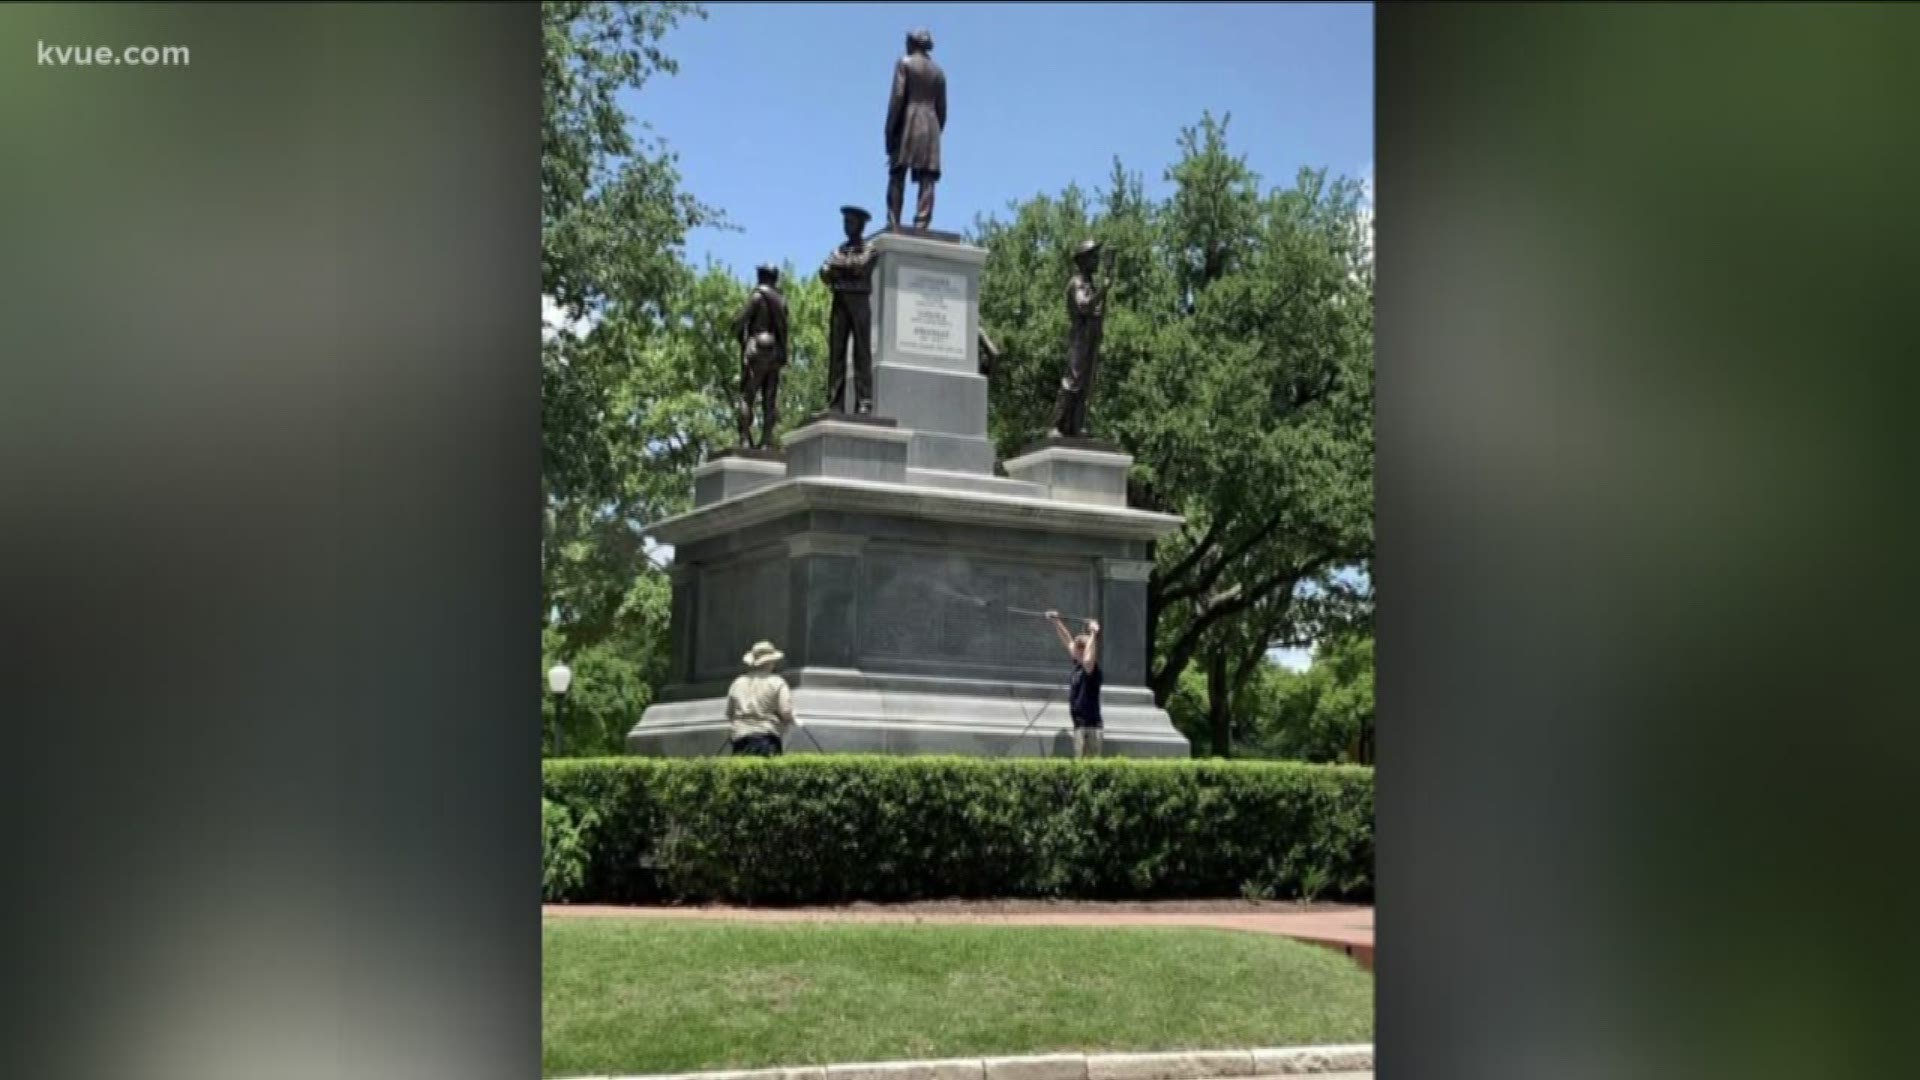 Someone vandalized the Confederate Soldiers Monument outside the Texas Capitol by painting the word "Racists" on its base.